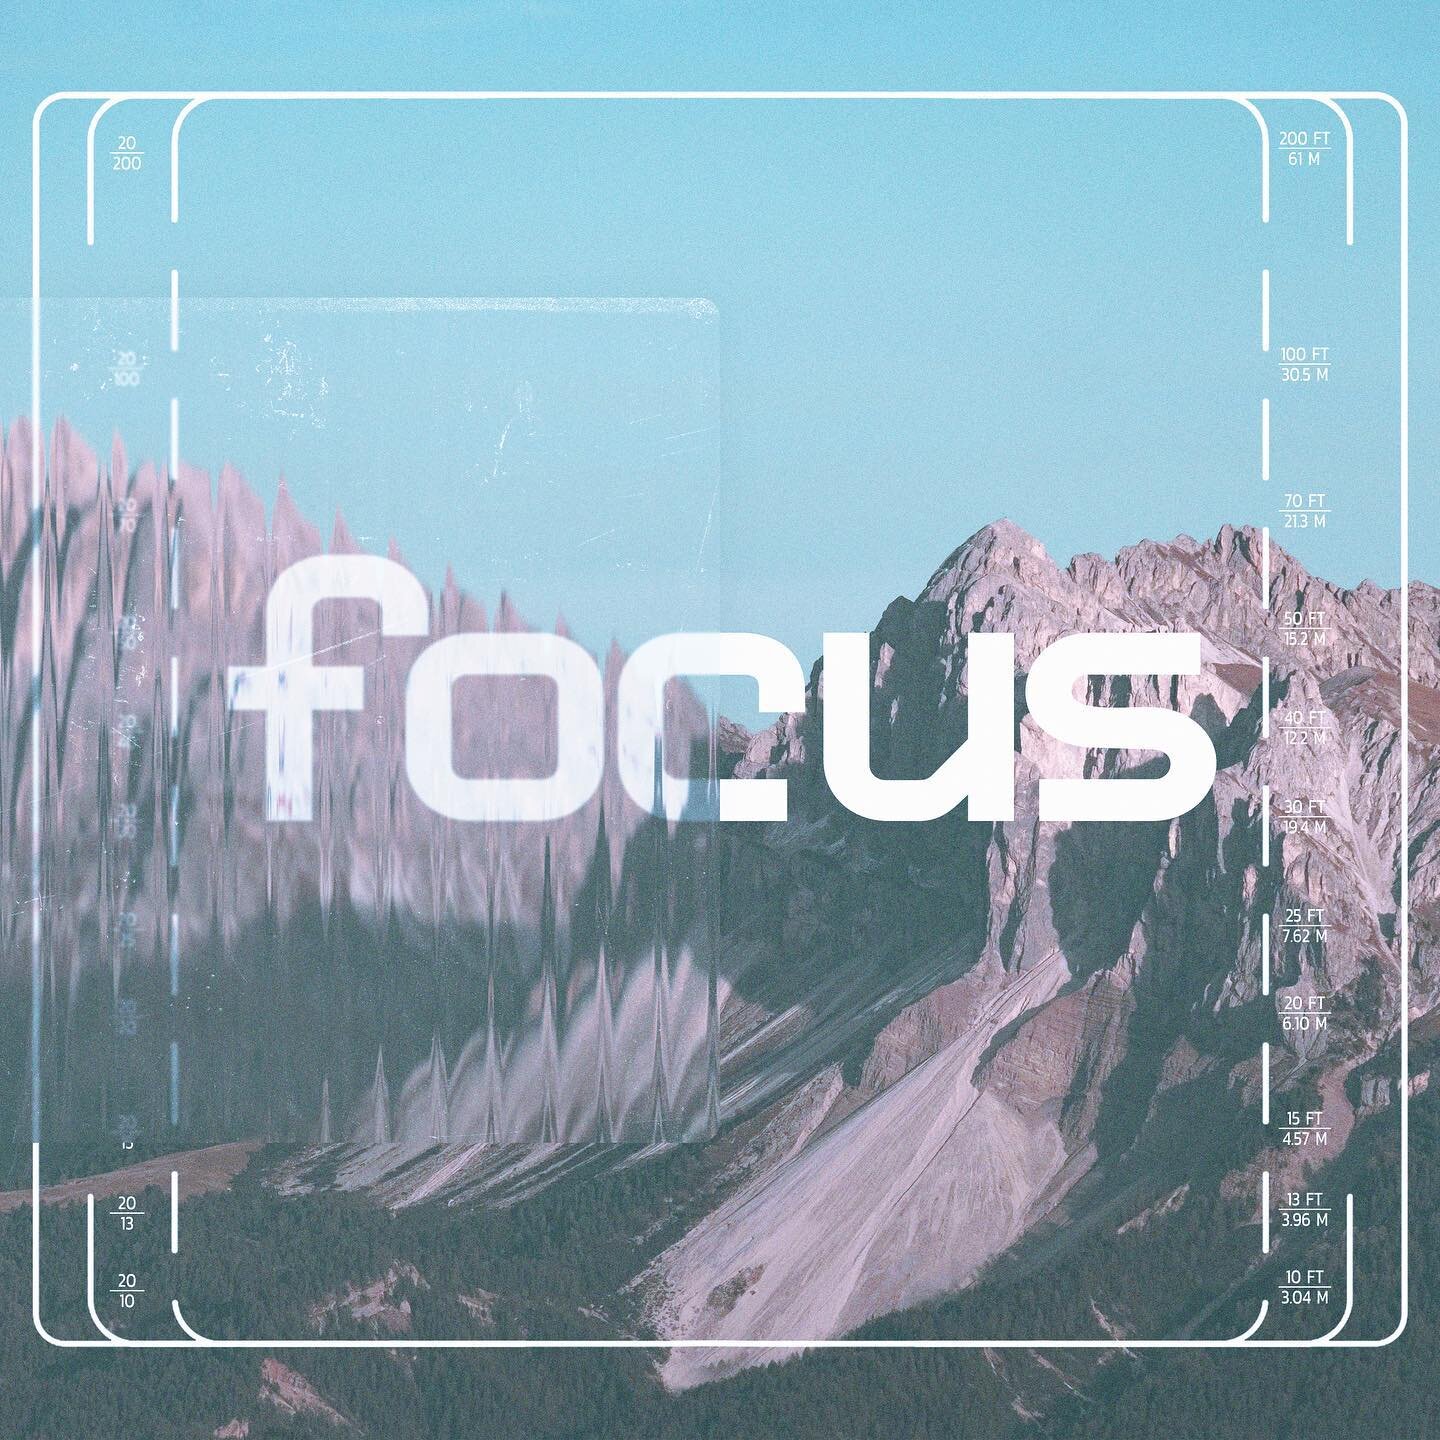 New series tonight at House Youth!

Bring your bible tonight [or the phone app] as we dive into the practices that will help us F O C U S on God and enable us to live live to the full.

See you at 7!